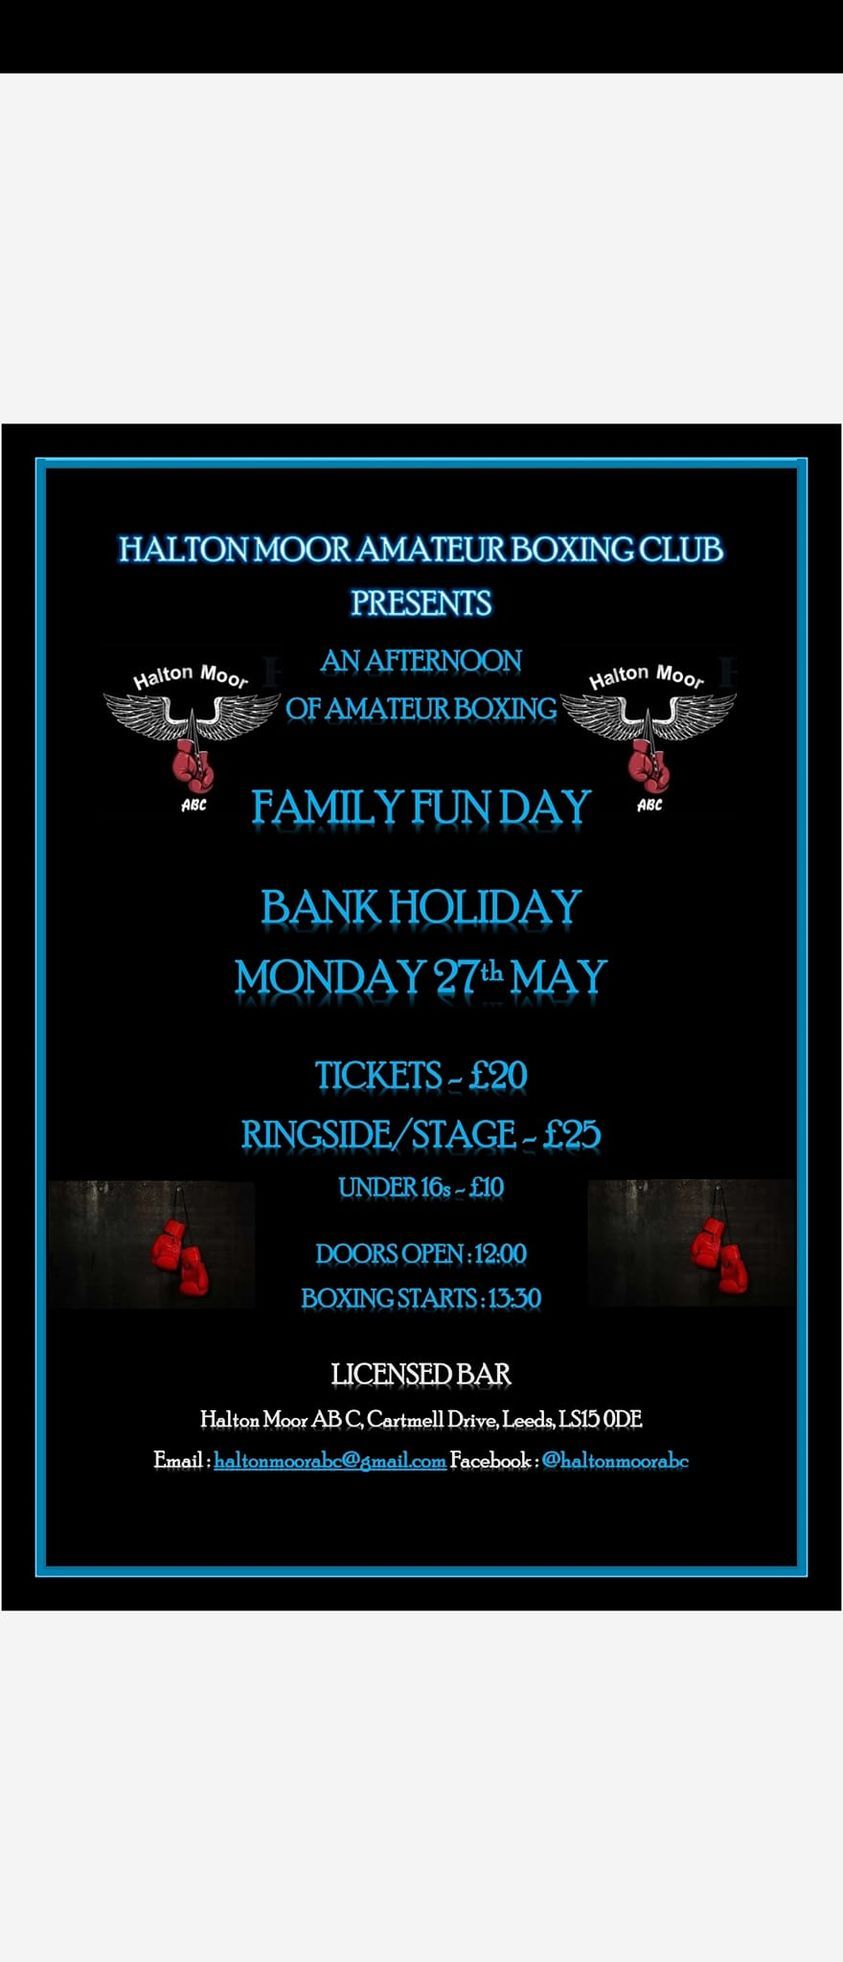 FAMILY FUN DAY - AN AFTERNOON OF AMATEUR BOXING